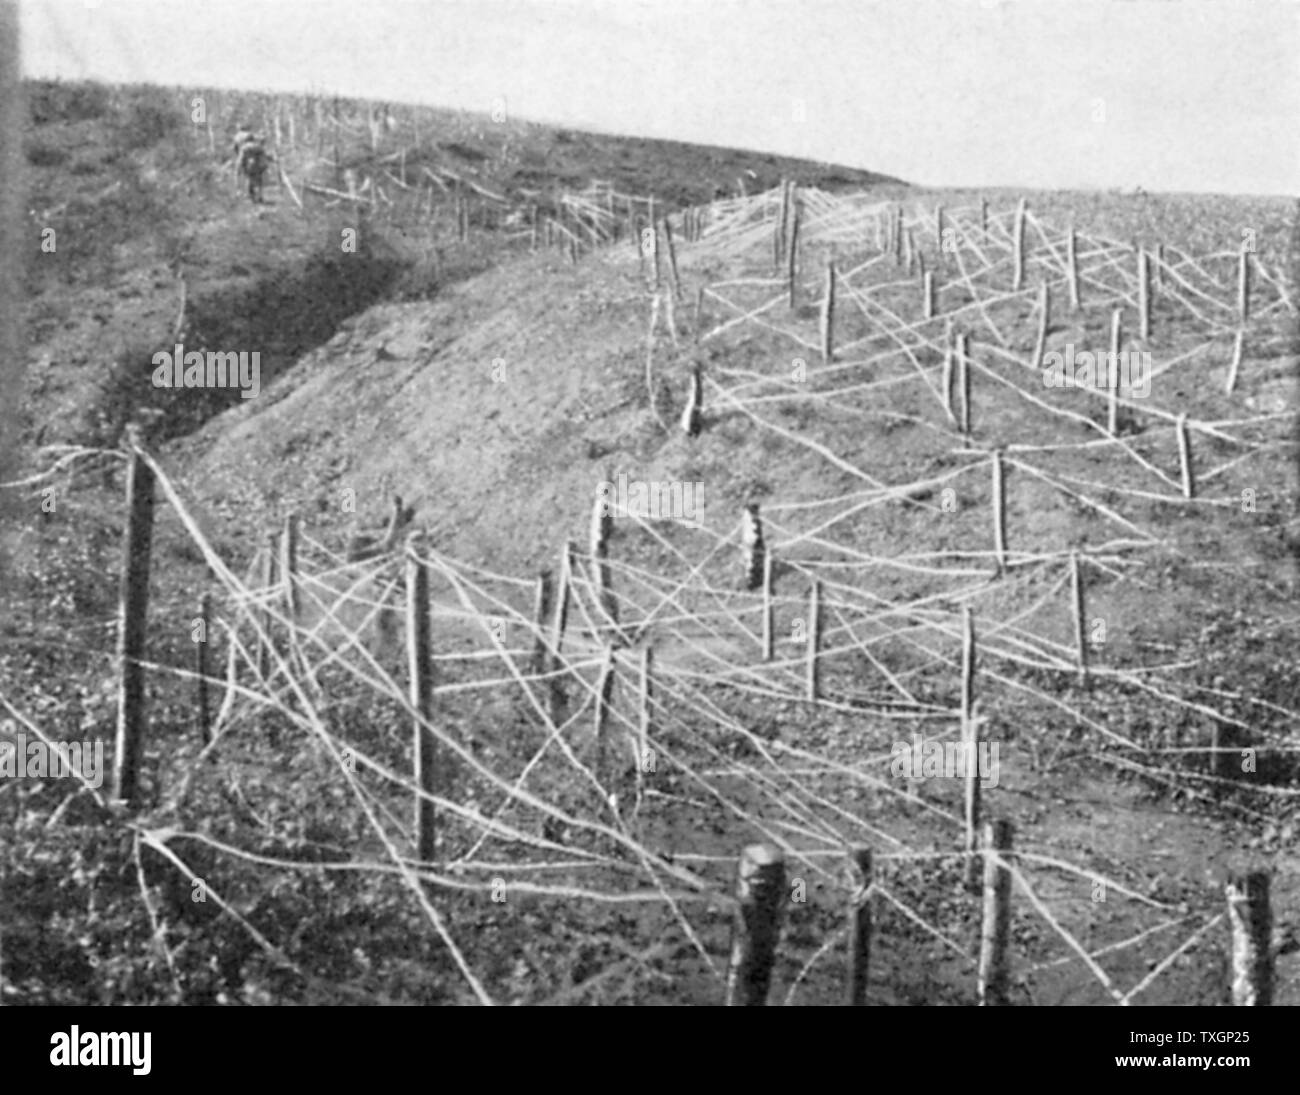 Russo-Japanese War 1904-1905 Russian barbed wire entanglements Stock Photo